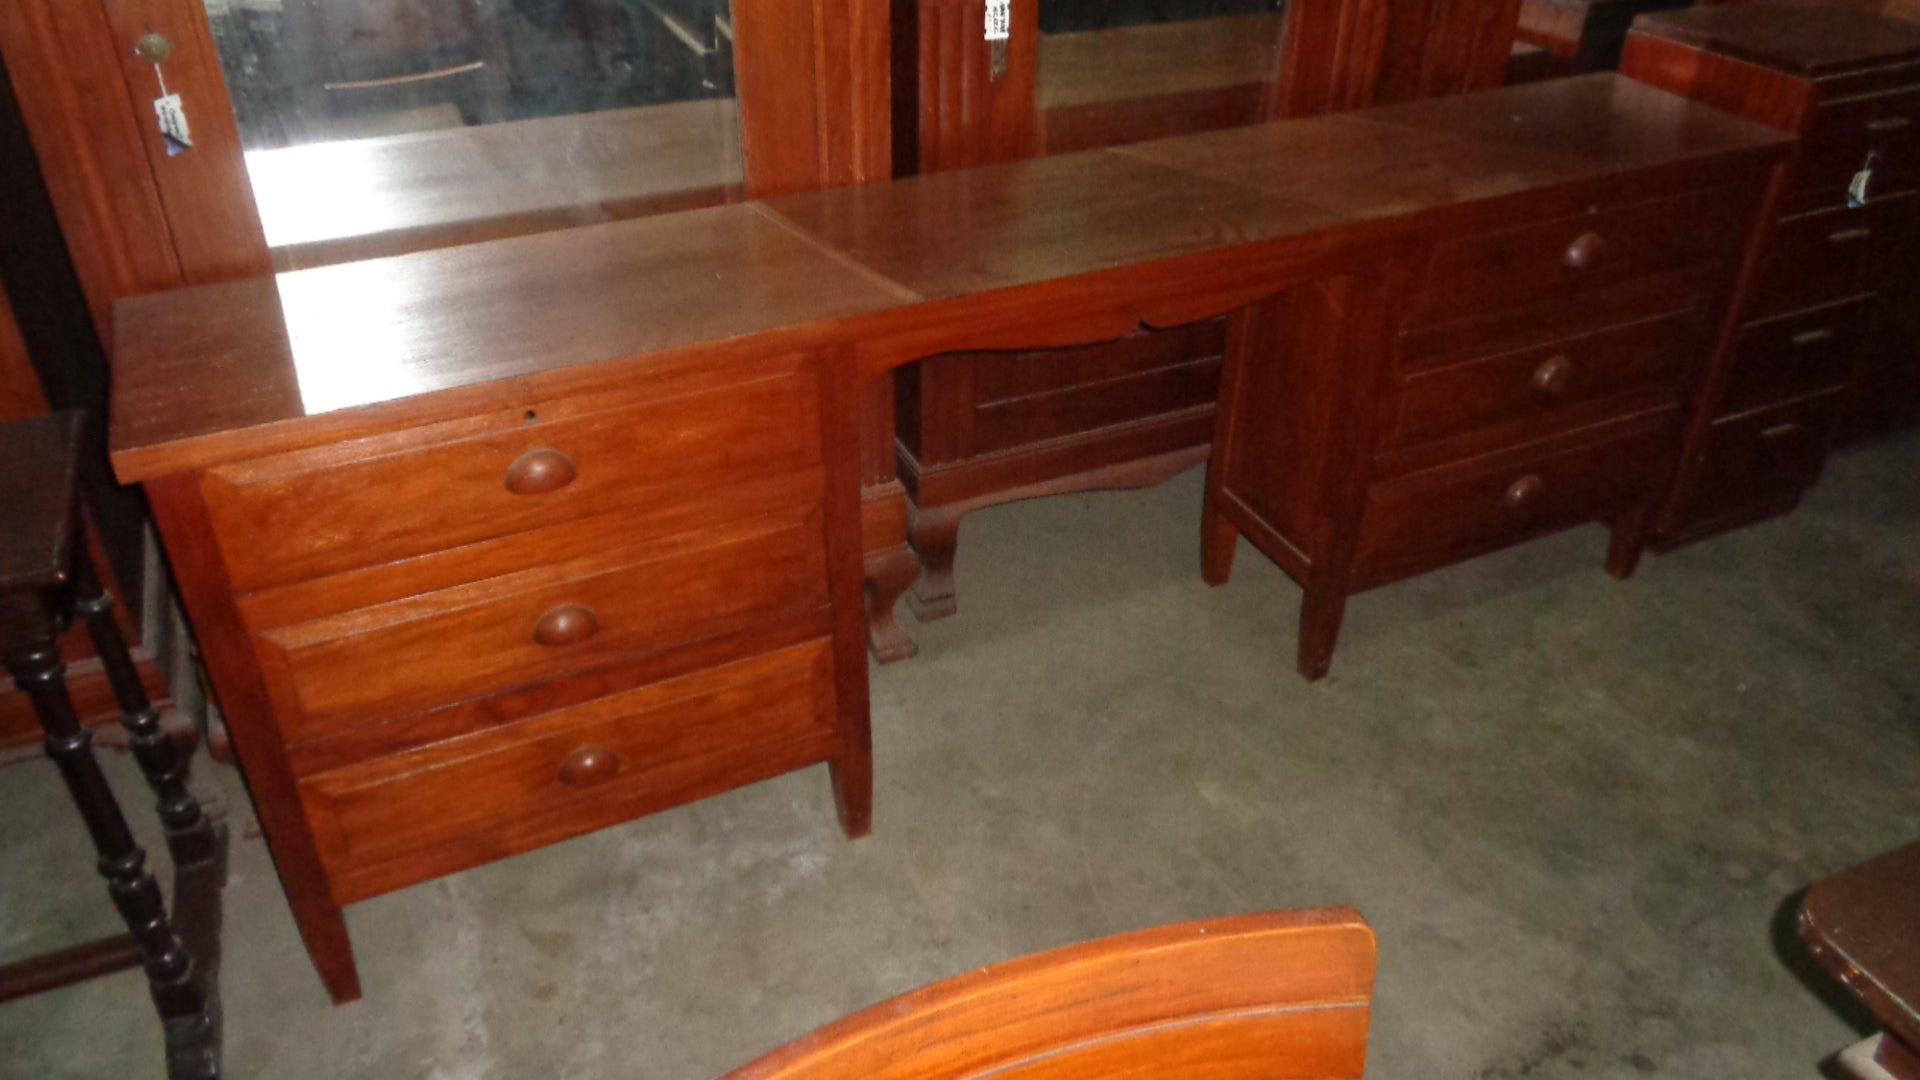 Lawyer Table AD86 Narra 1960′s Size 15″ x 70″ x 32 3/4″Ht.